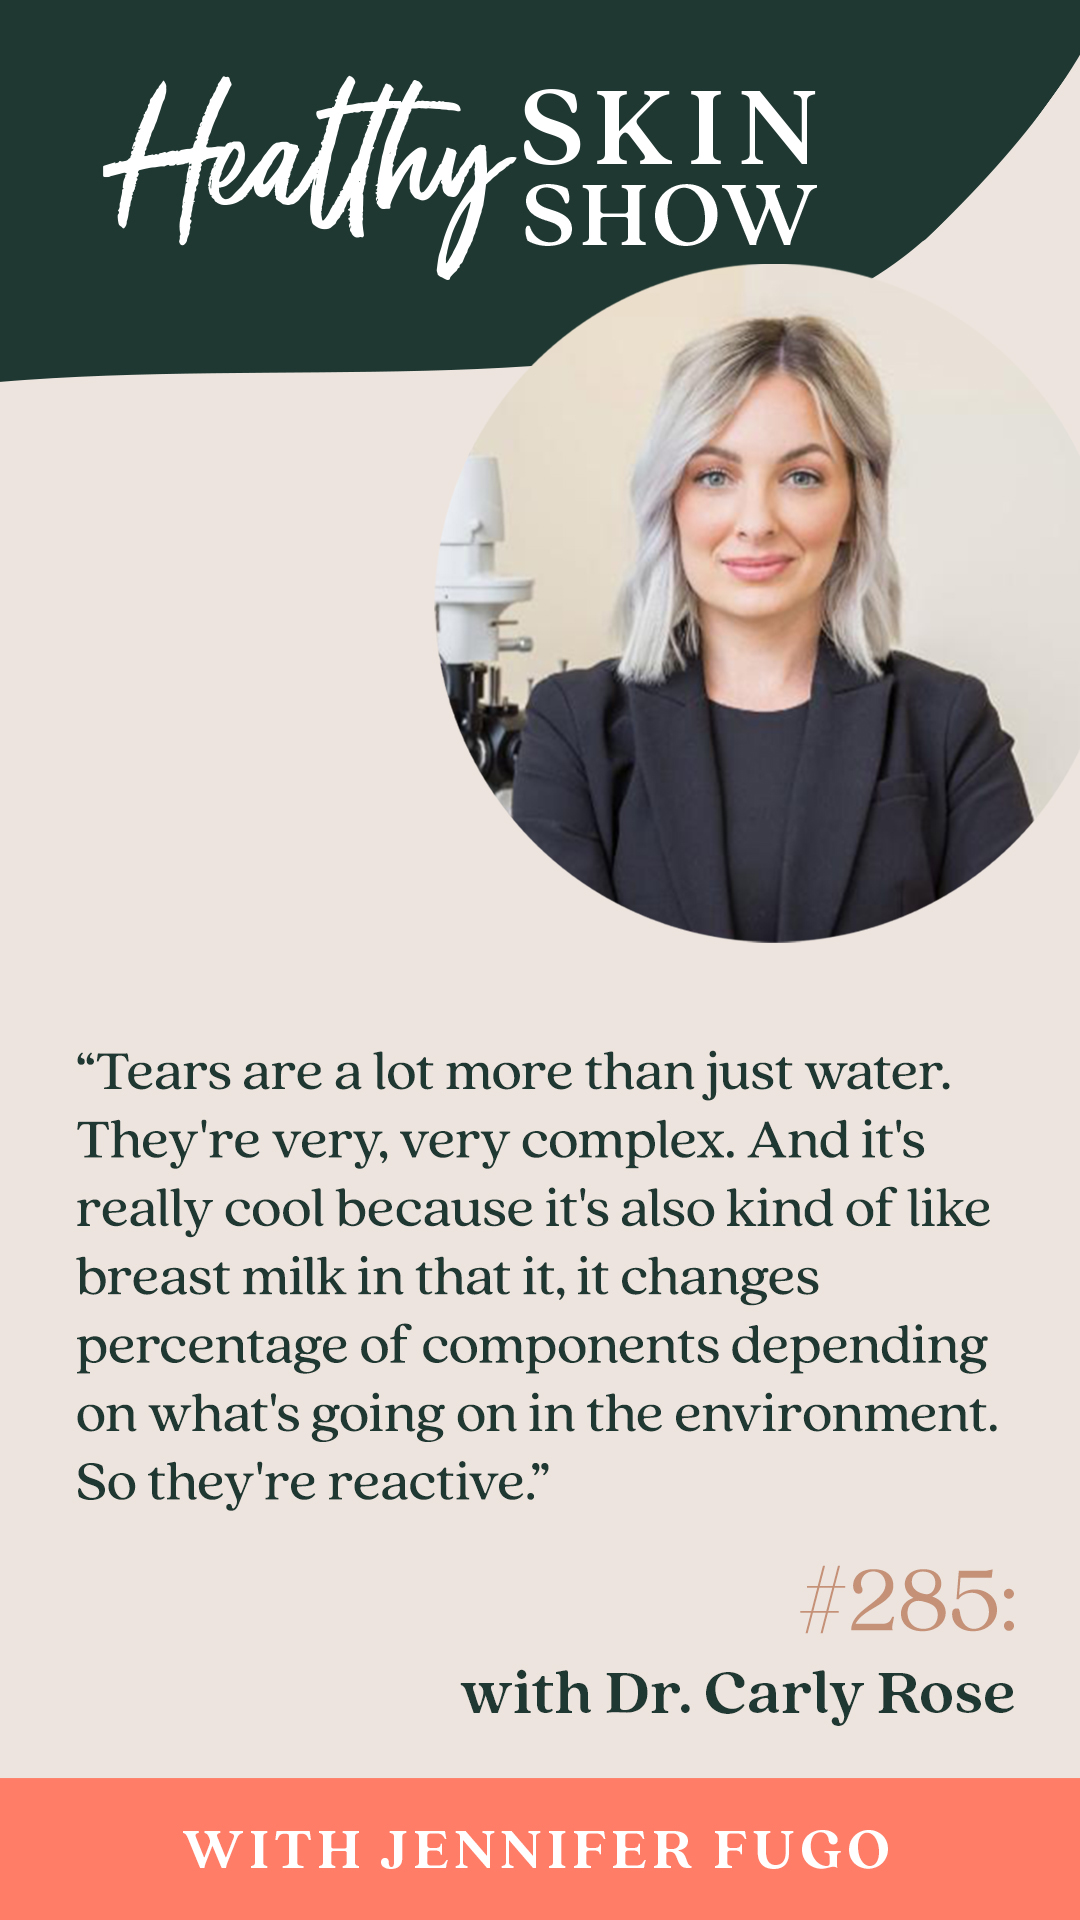 "Tears are a lot more than just water. They're very, very complex. And it's really cool because it's also kind of like breast milk in that it, it changes percentage of components depending on what's going on in the environment. So they're reactive."